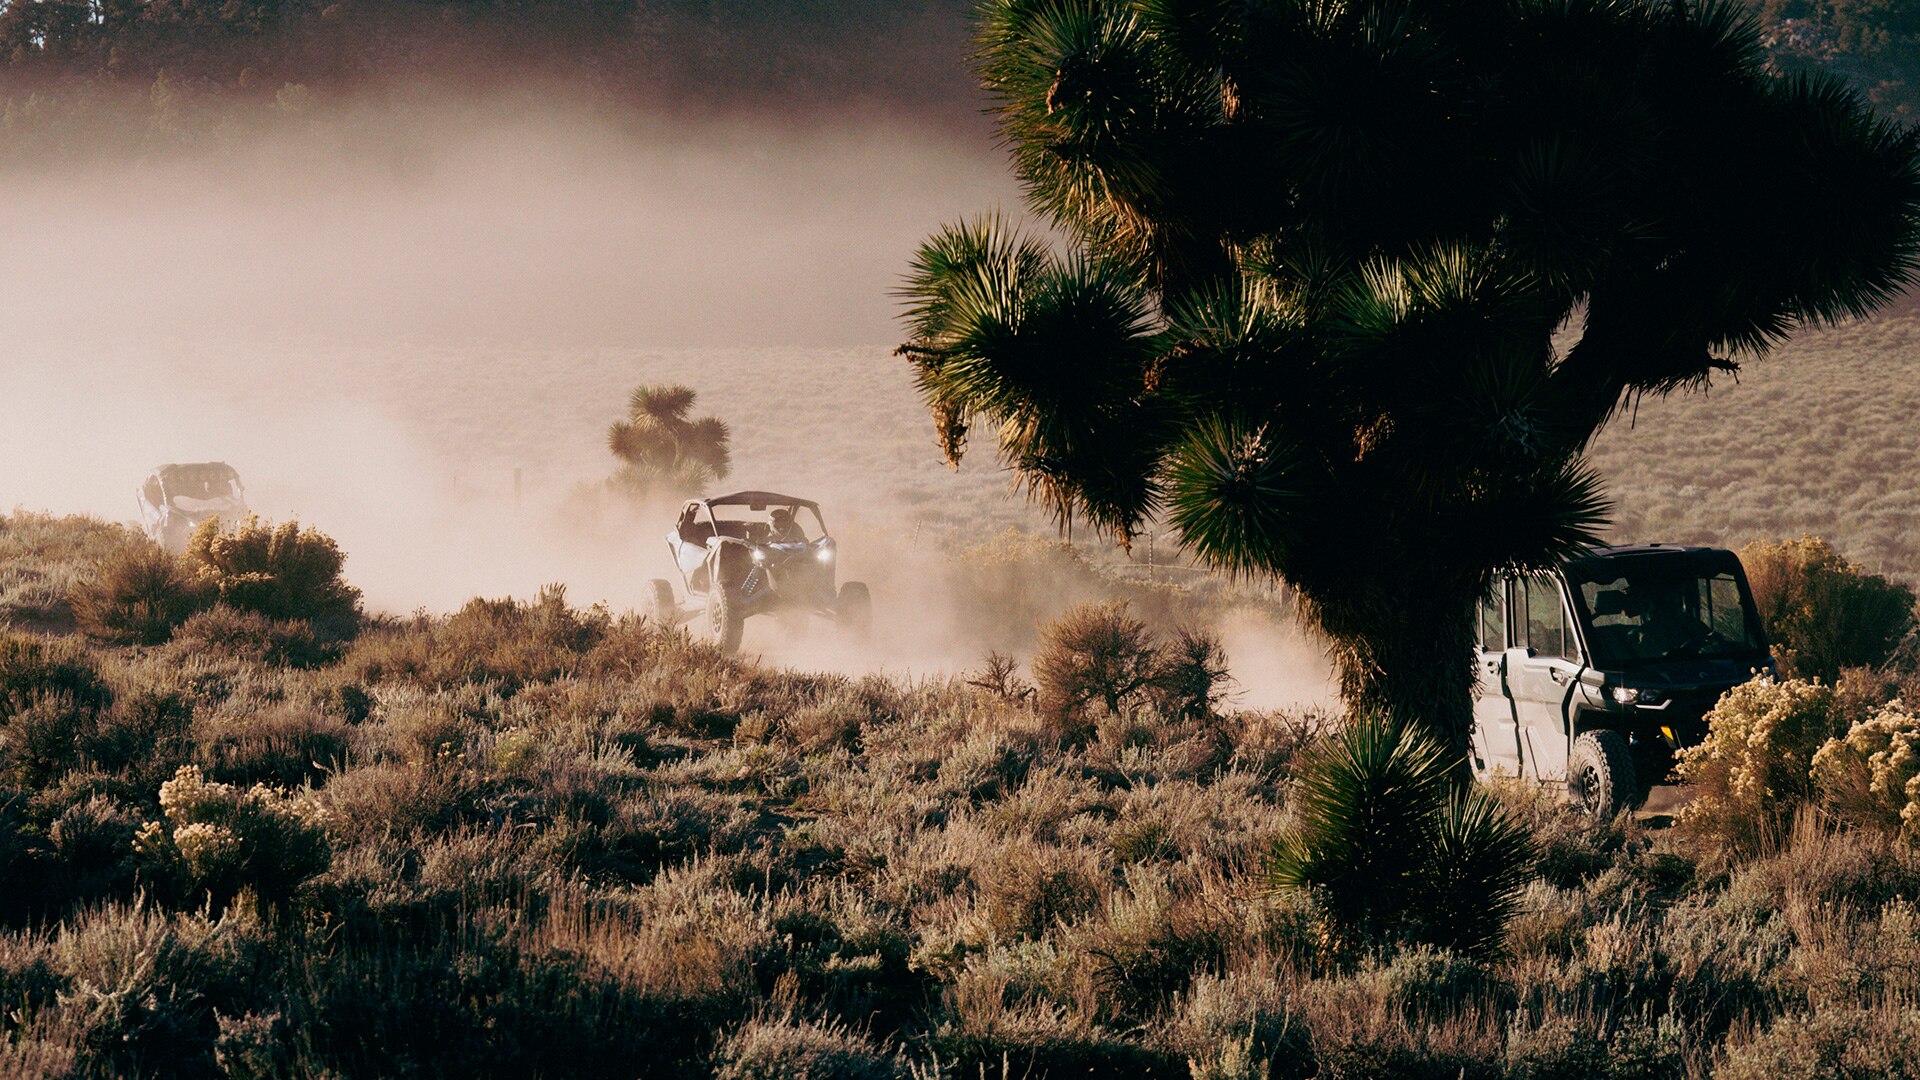 Can-Am side-by-side vehicles kicking up clouds of dust as they drive through a trail of dirt.